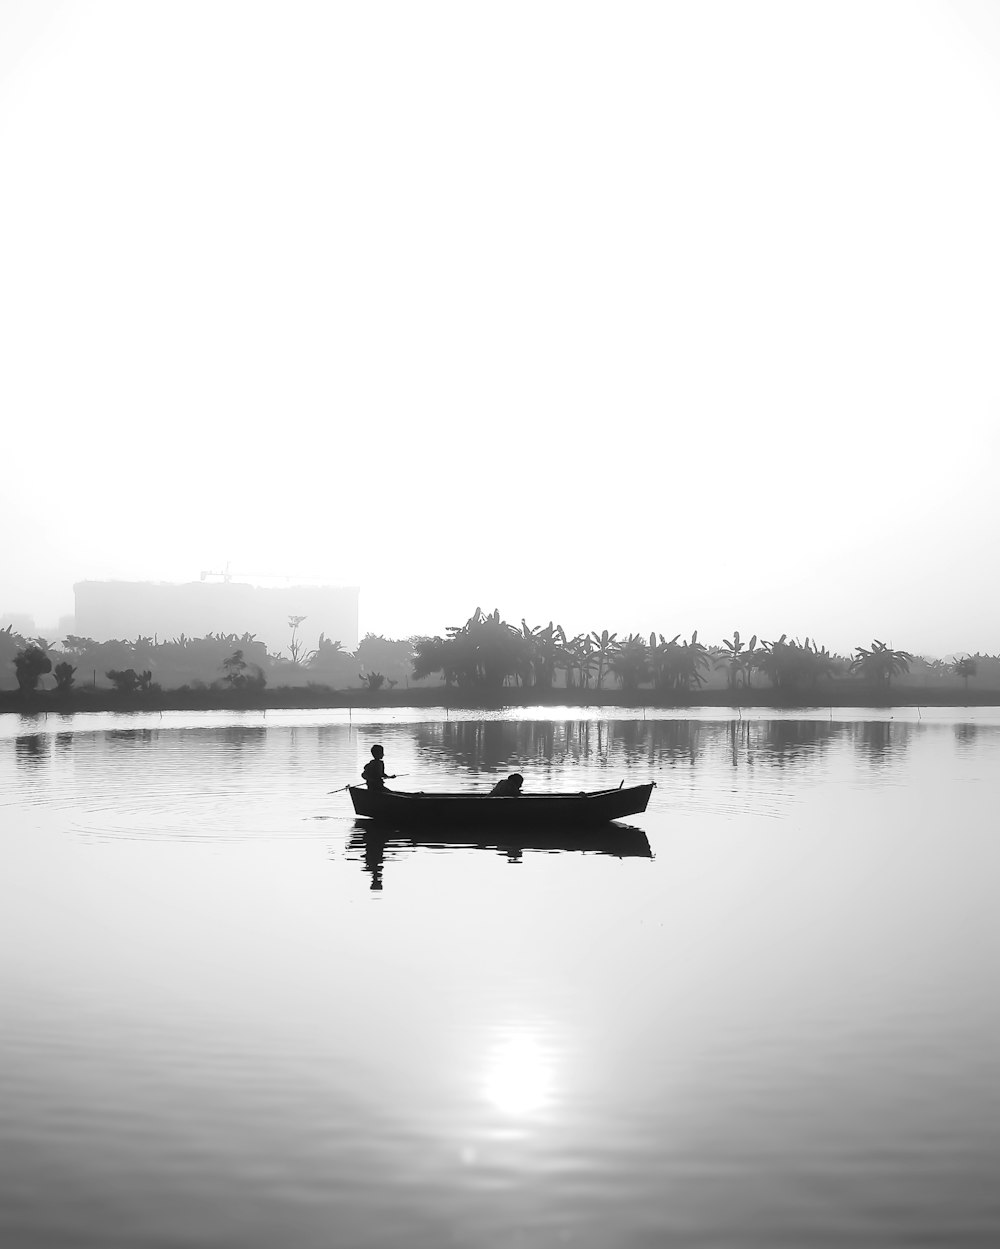 a person in a small boat on a large body of water